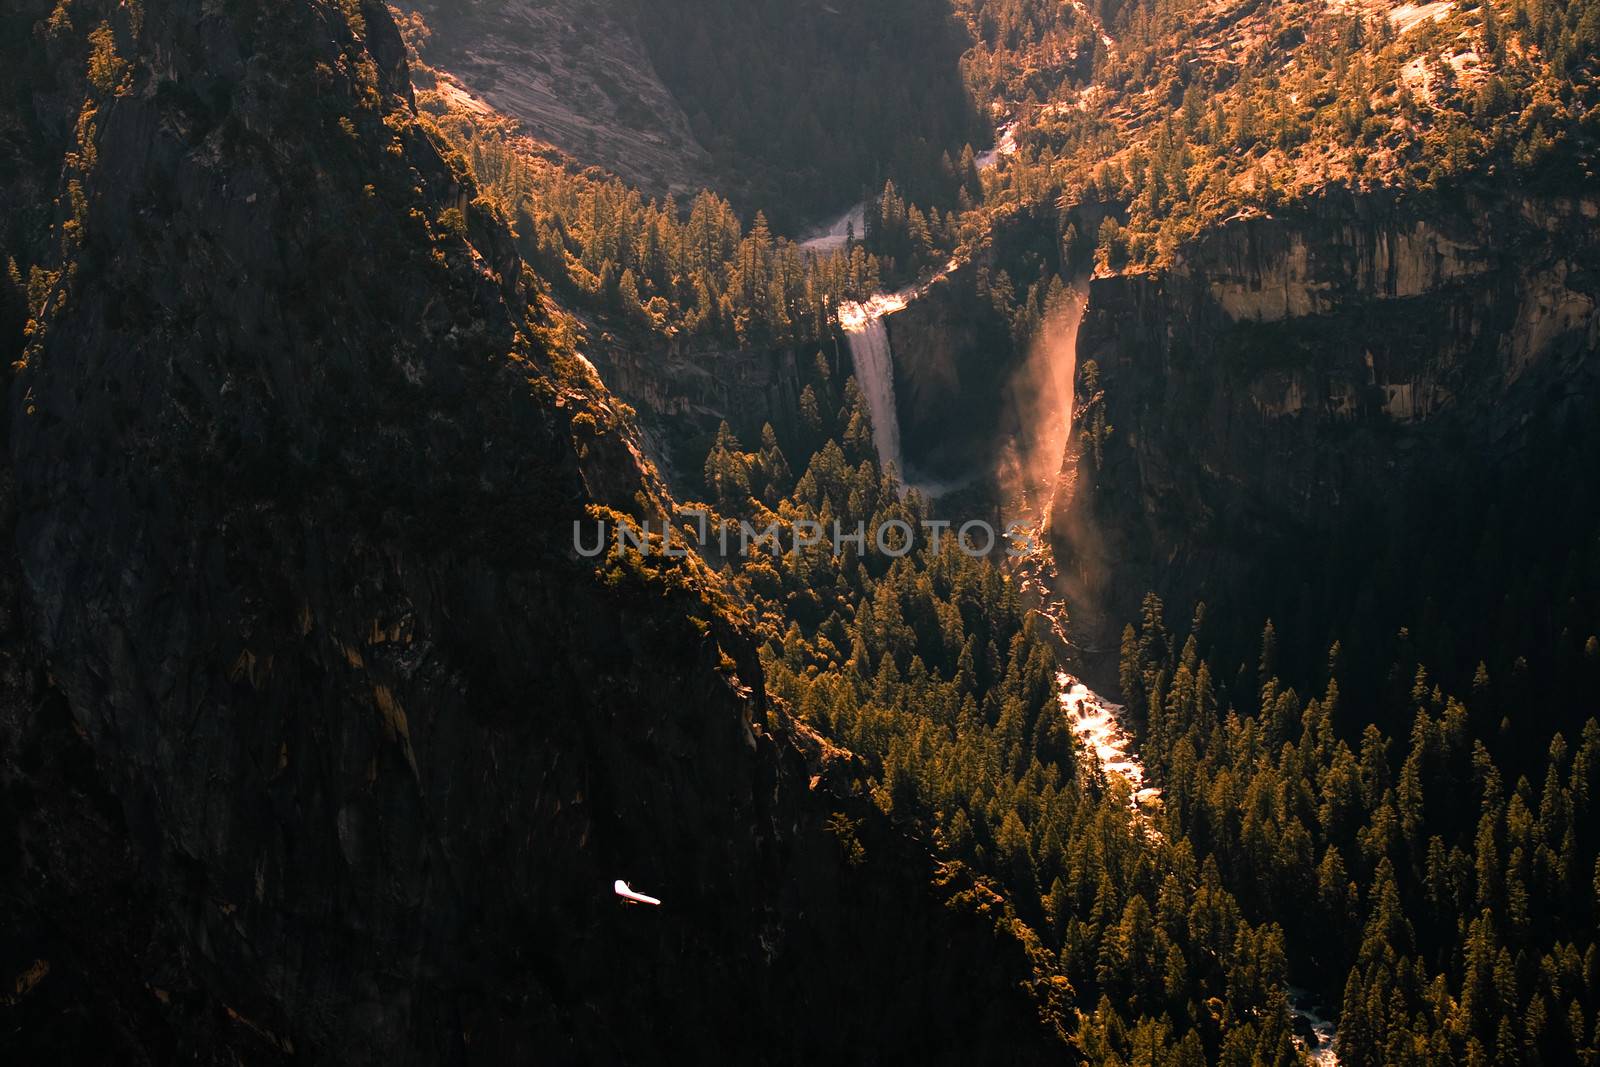 Aerial view of waterfall in a forest, Vernal Fall, Glacier Point, Yosemite Valley, Yosemite National Park, California, USA